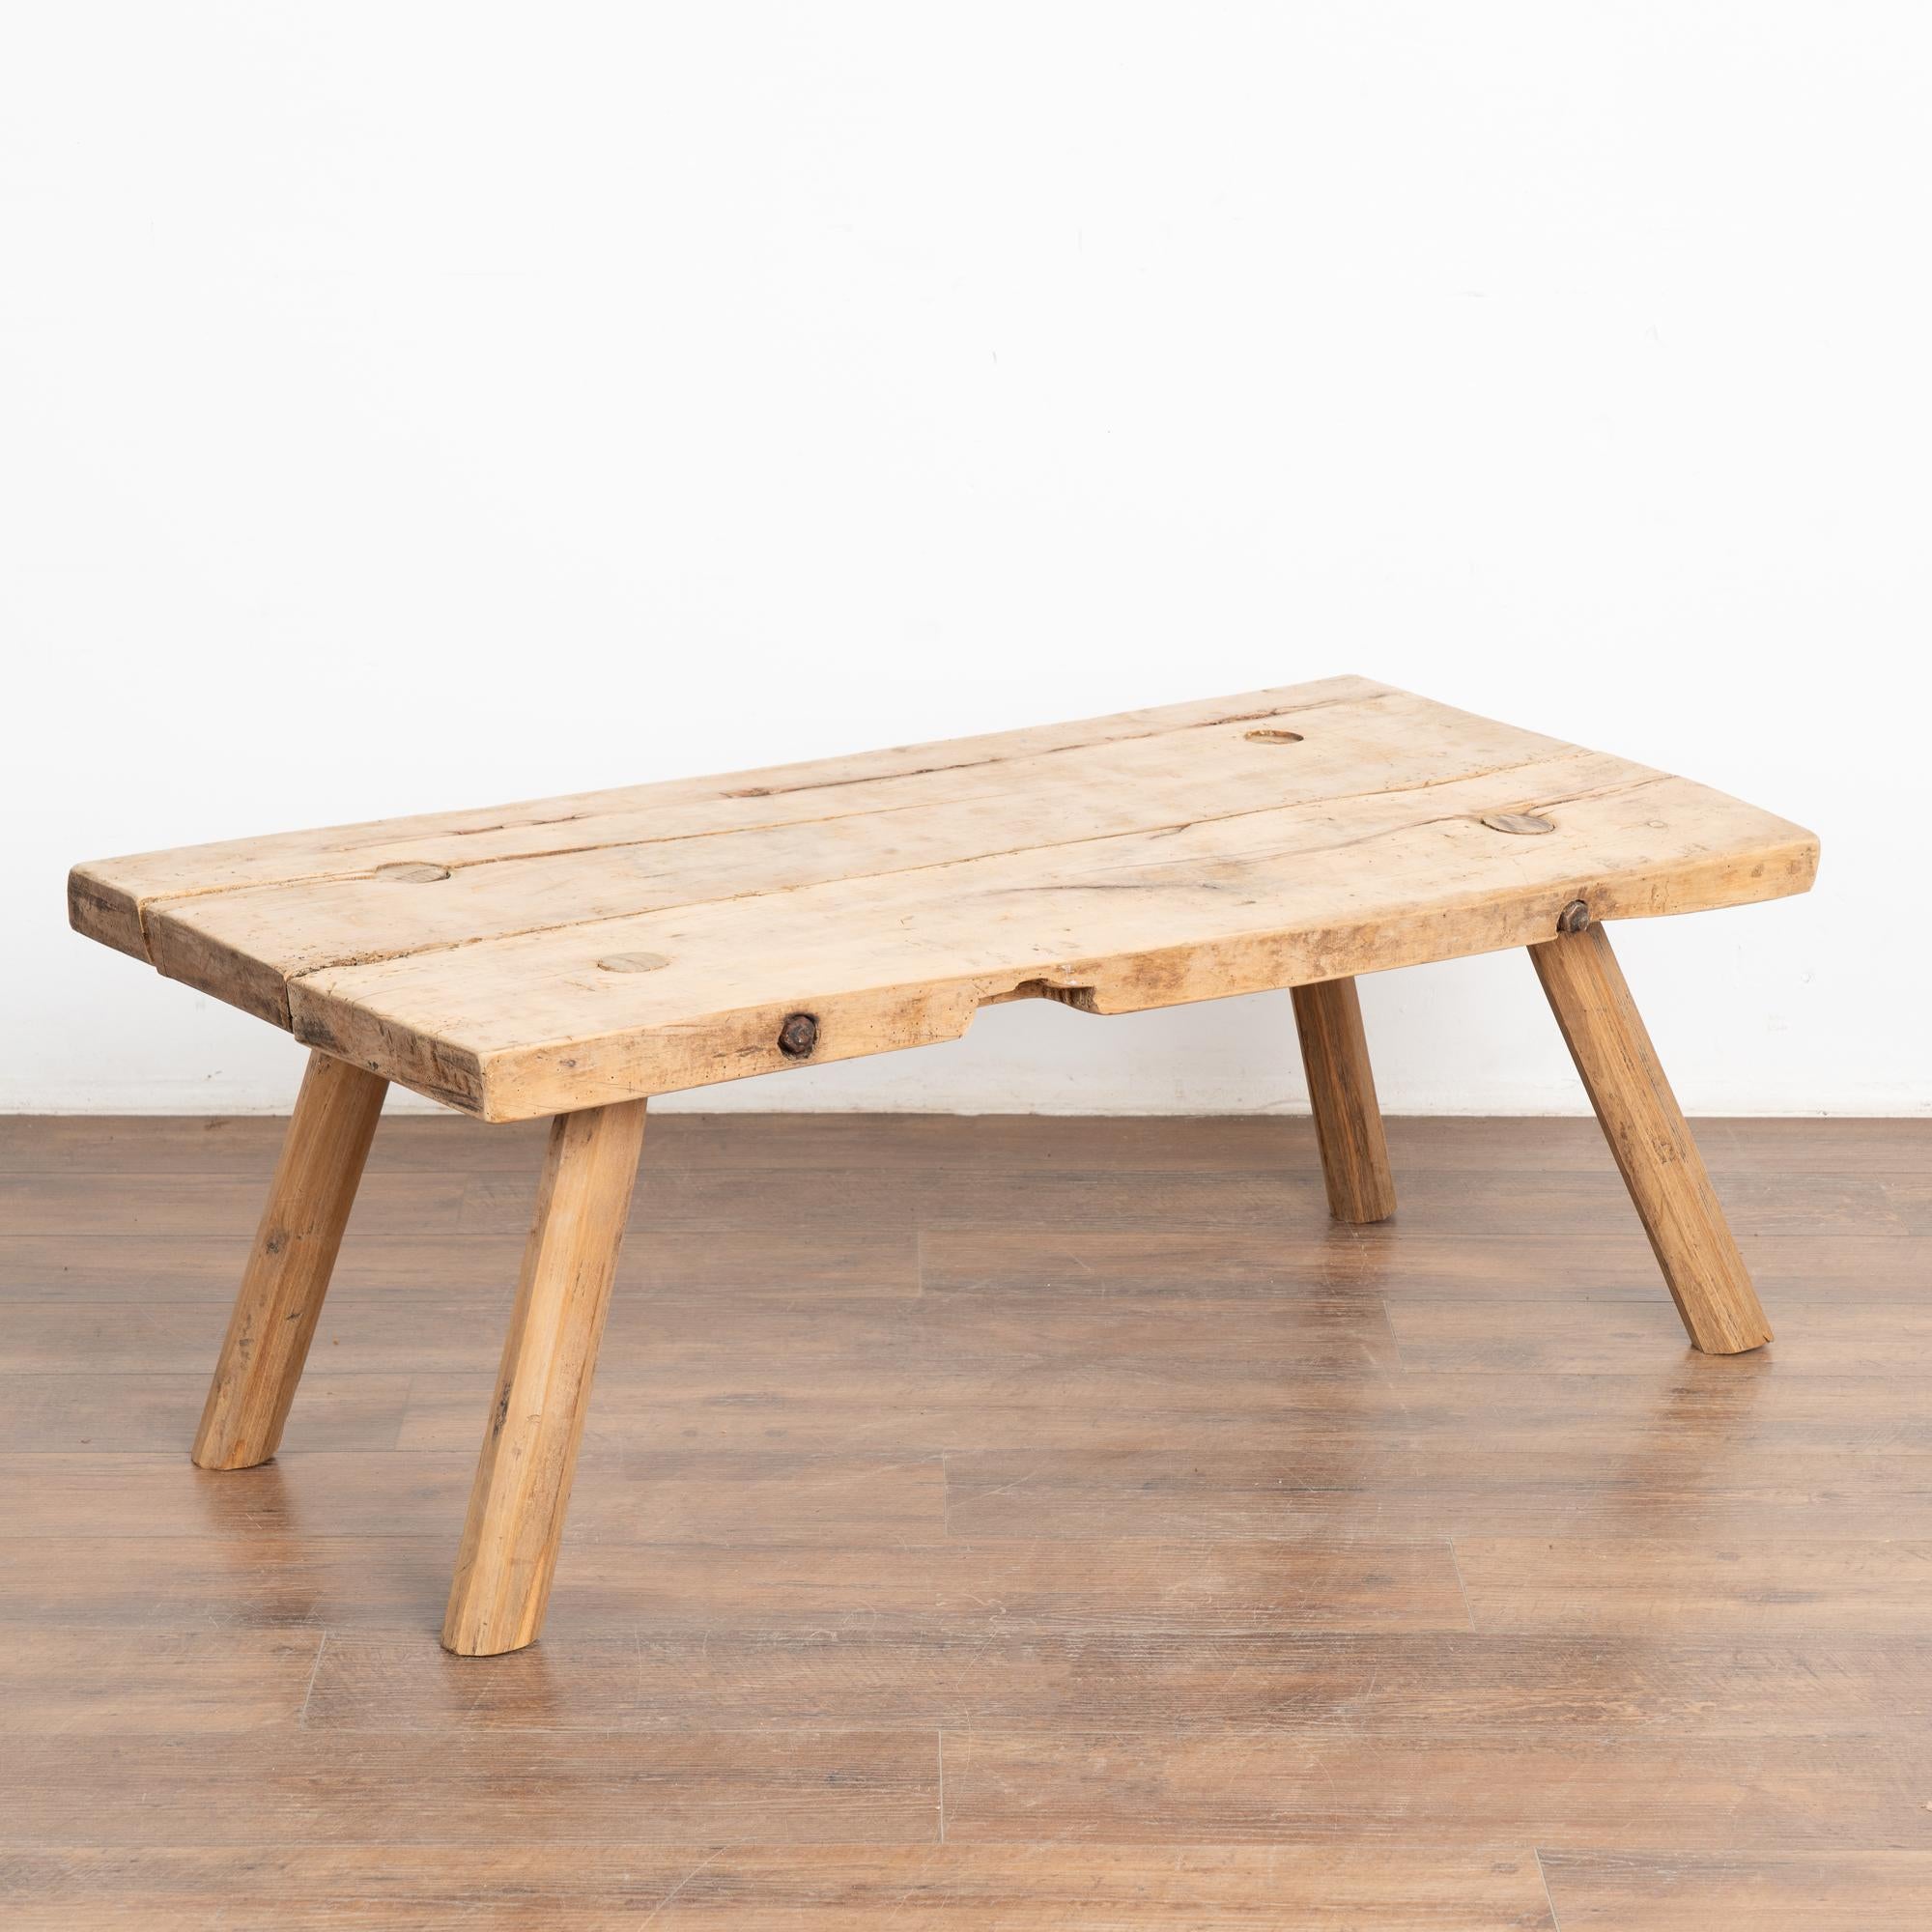 The appeal of this rustic coffee table comes from the thick wood of the top that originally served as a work table. 
Note the gouges, nicks, deep cracks and old dried worm holes that all combine to build the vintage character of this coffee table.